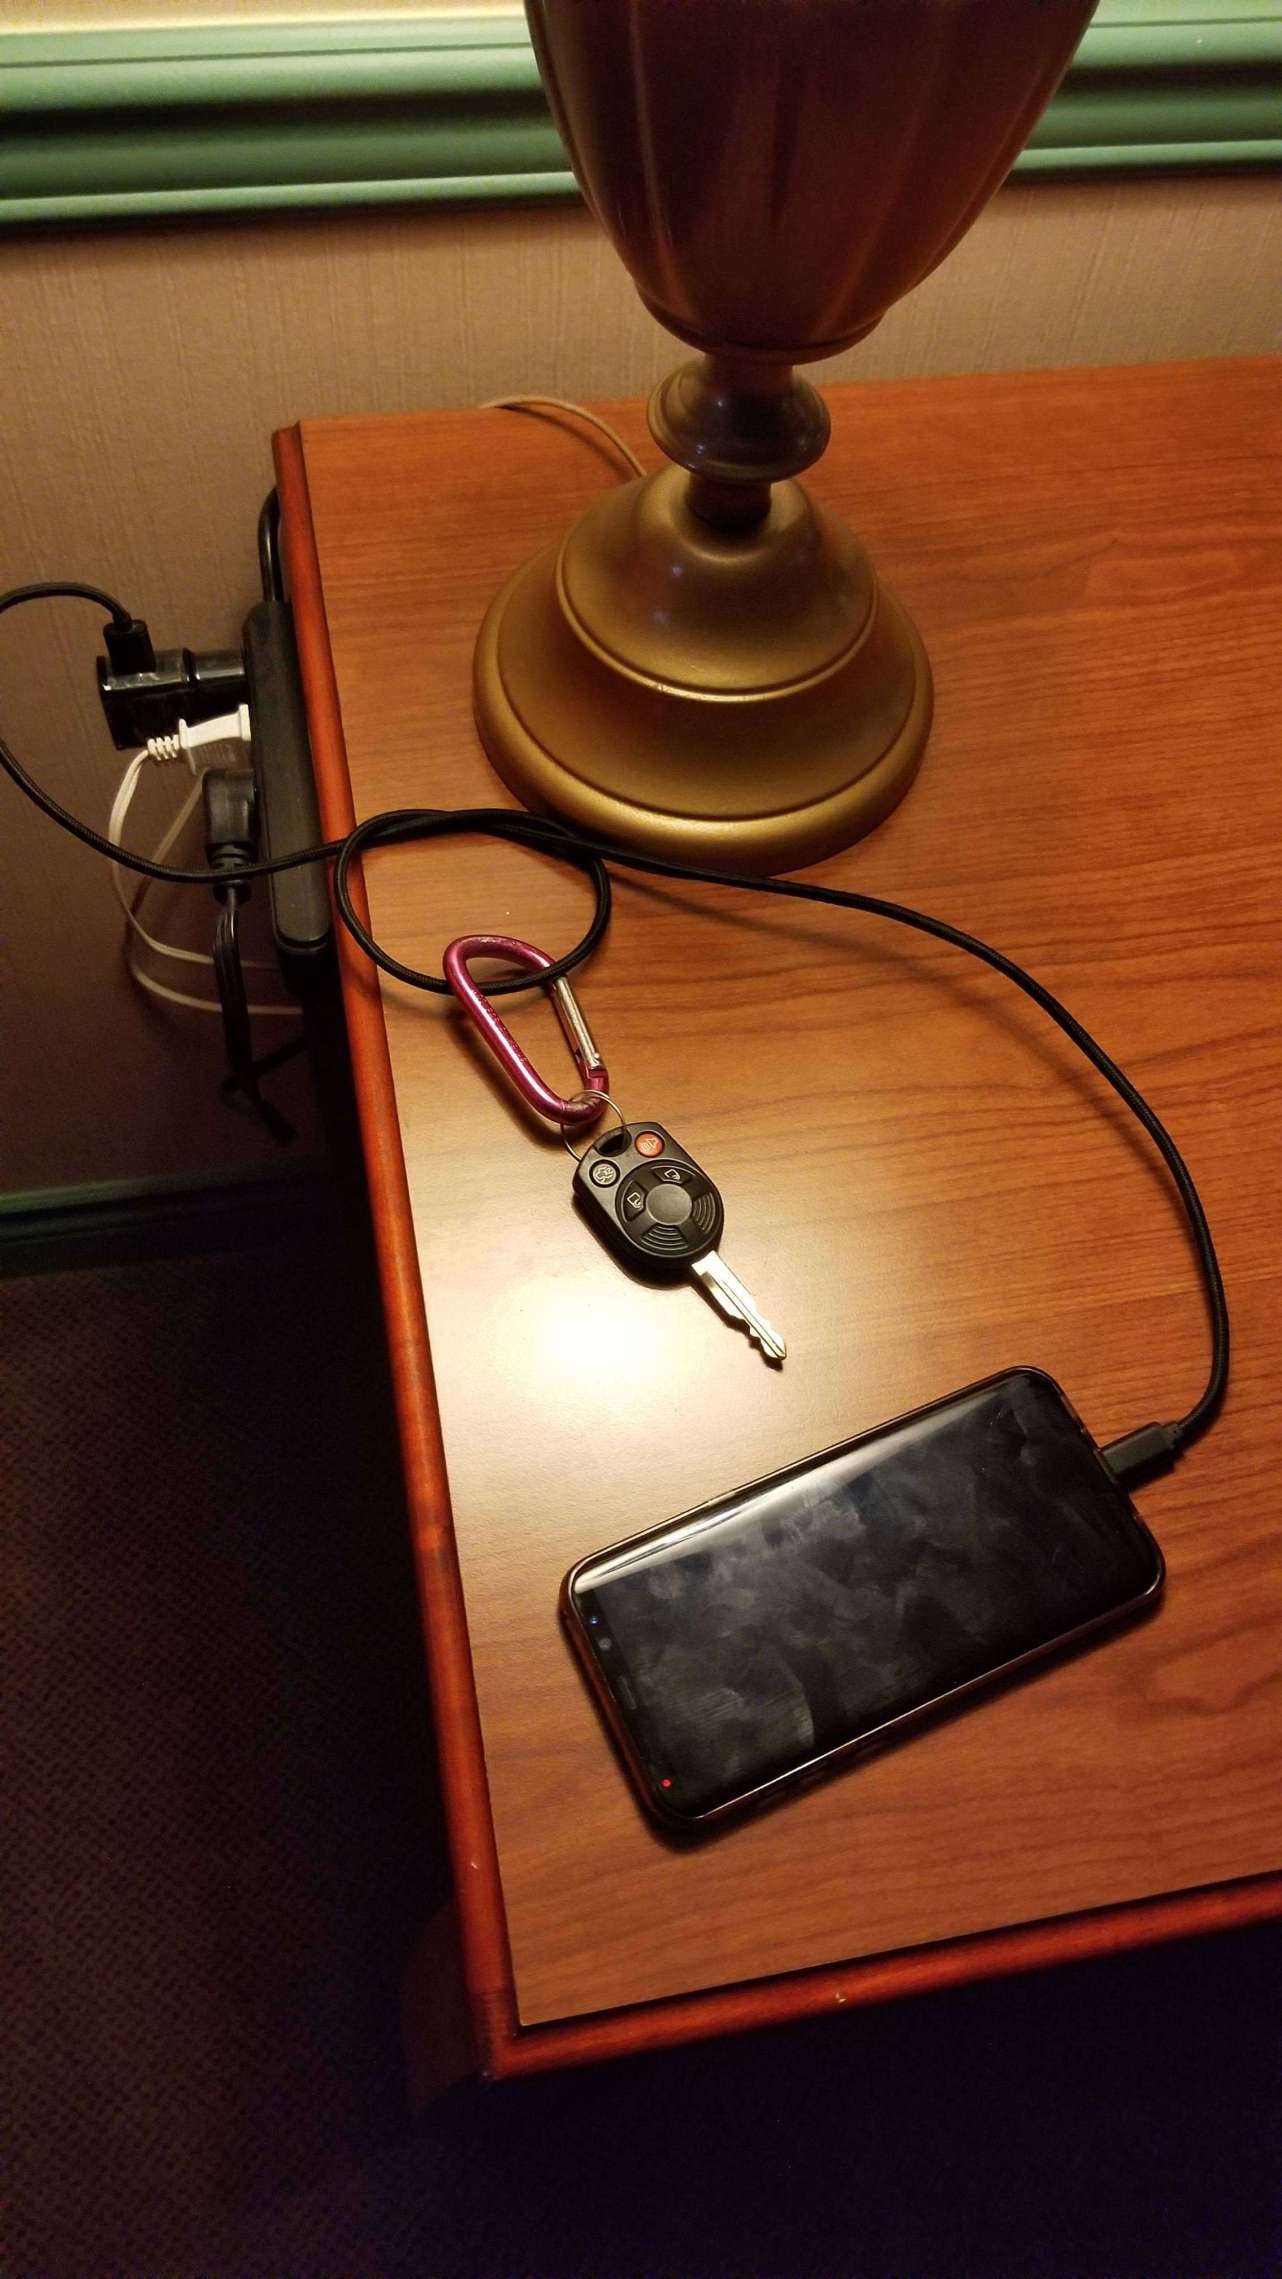 Attach your keys to your phone charger so you don’t forget it when you leave the hotel.